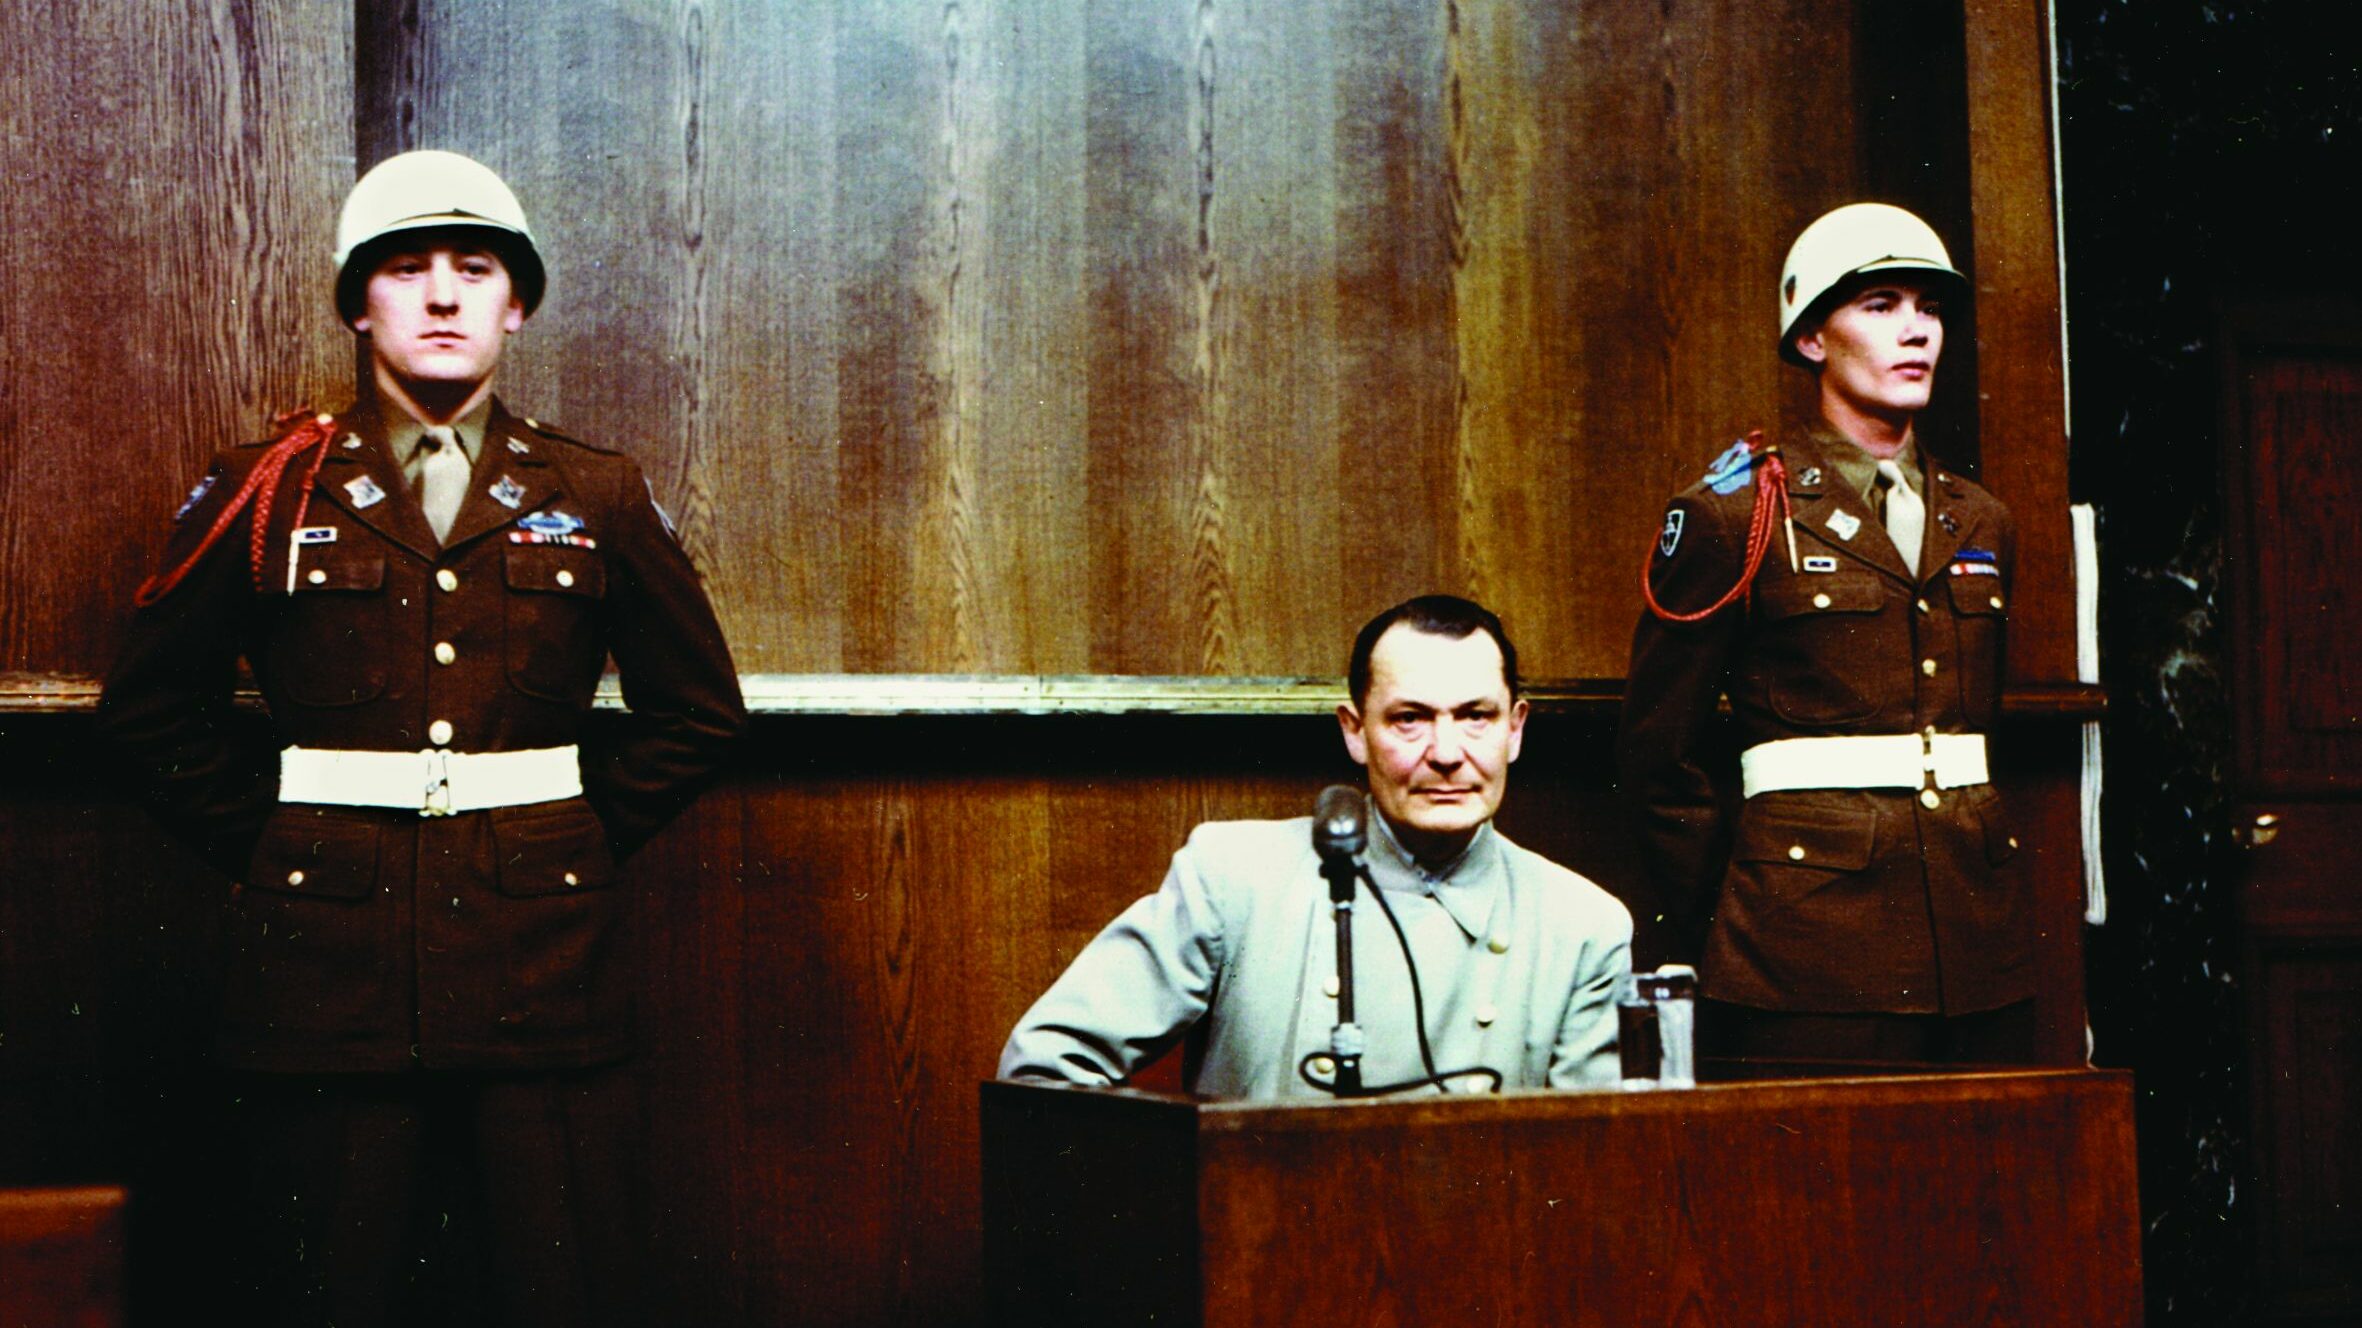 A gaunt Hermann Göring, former chief of the Nazi Luftwaffe, takes the witness stand during the Nuremberg trials.
